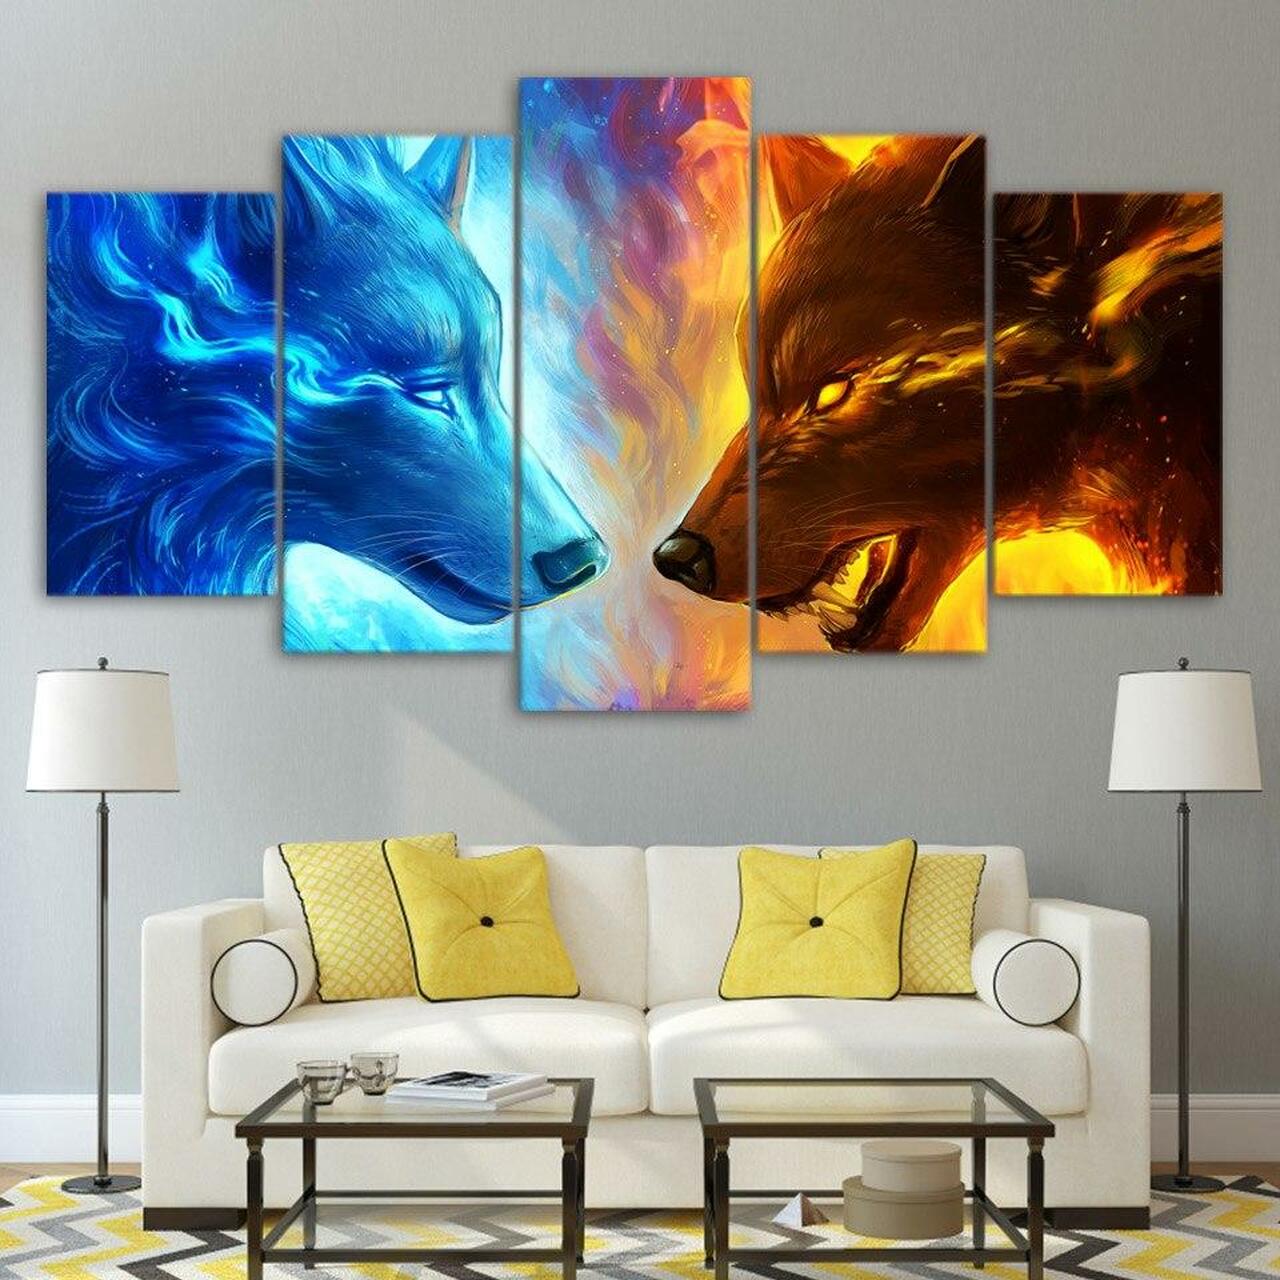 Fire and Ice 5 Panel 5 Piece Canvas Art Wall Decor